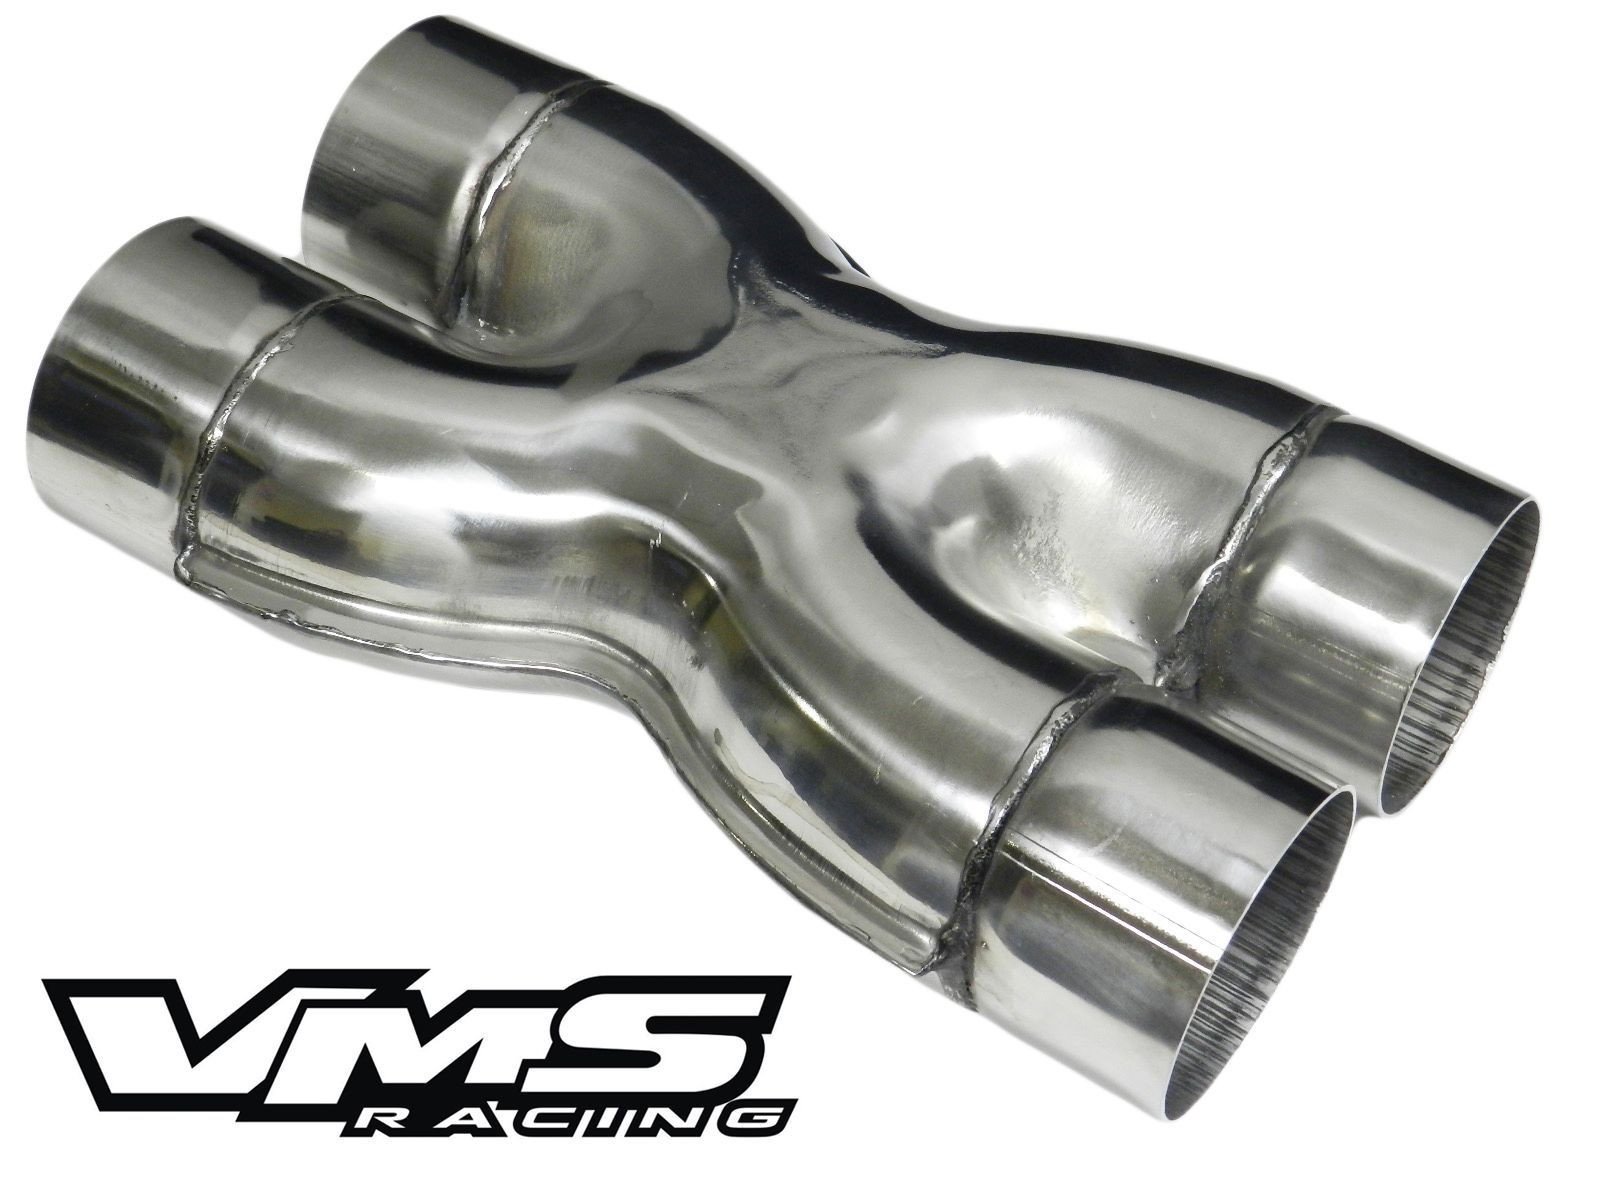 VMS Racing Stainless Steel 3.0" inch Crossover X-Pipe, Chrome Finish, Universal Fit